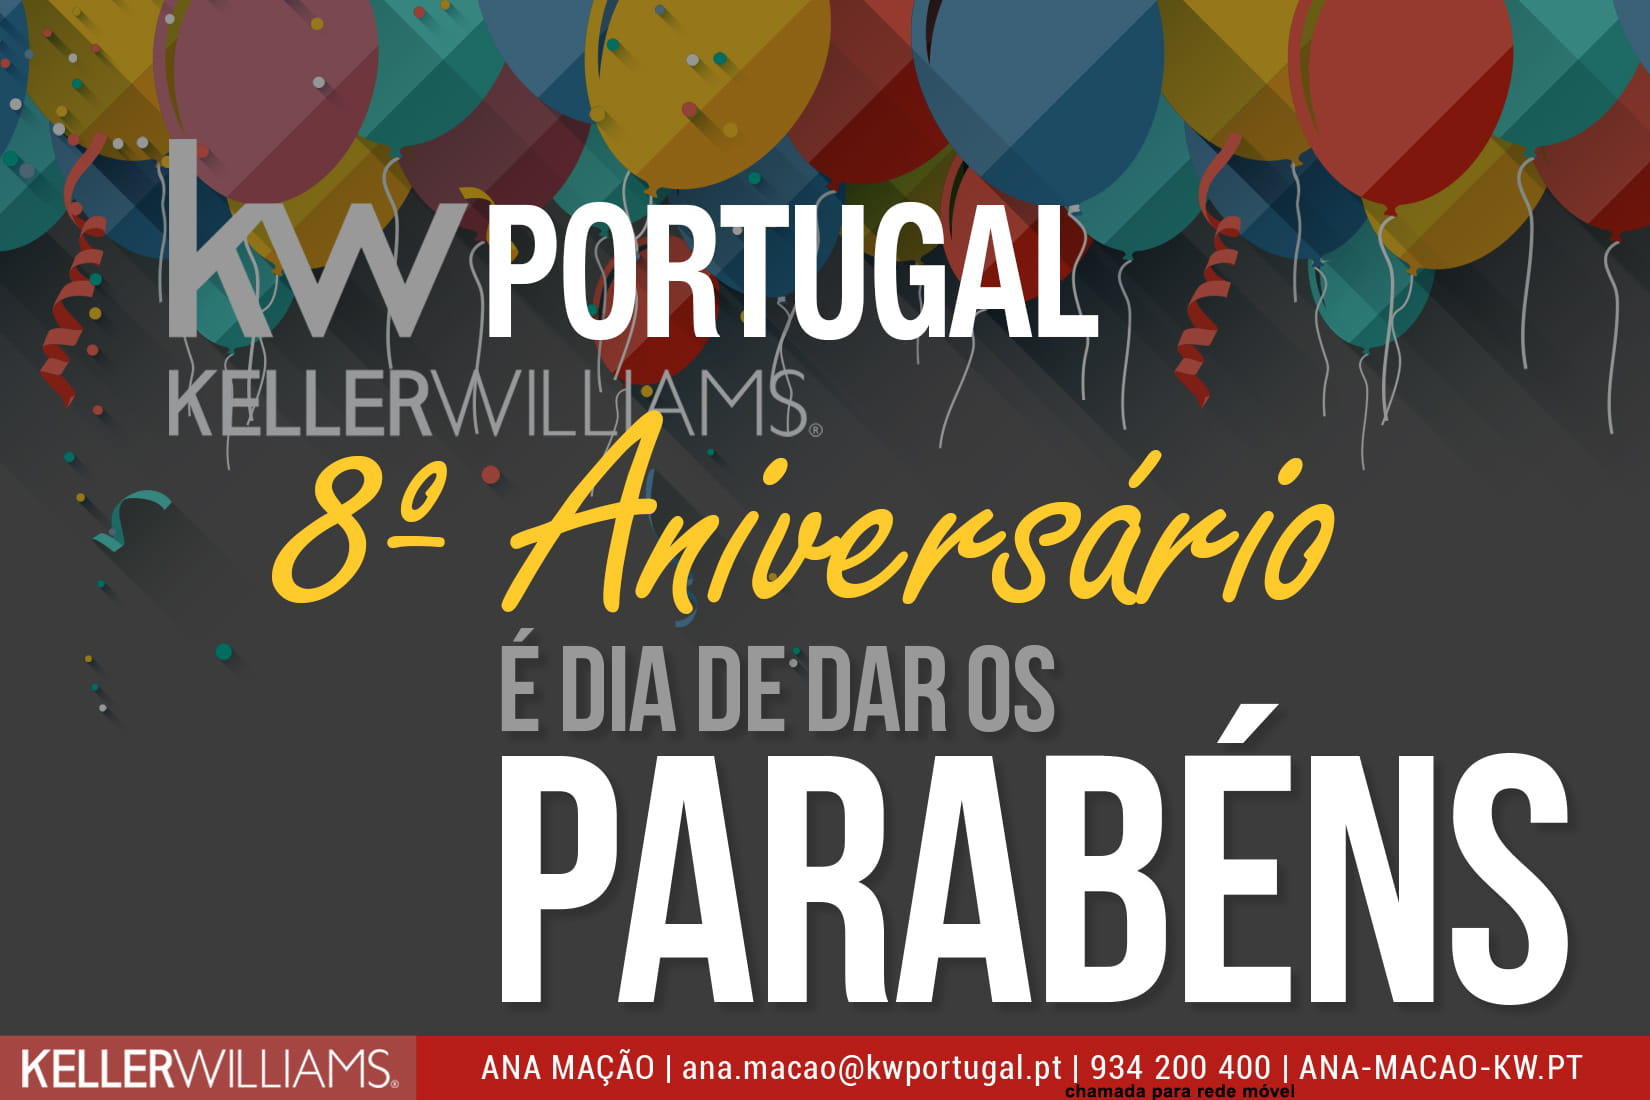 8th Anniversary of KW Portugal